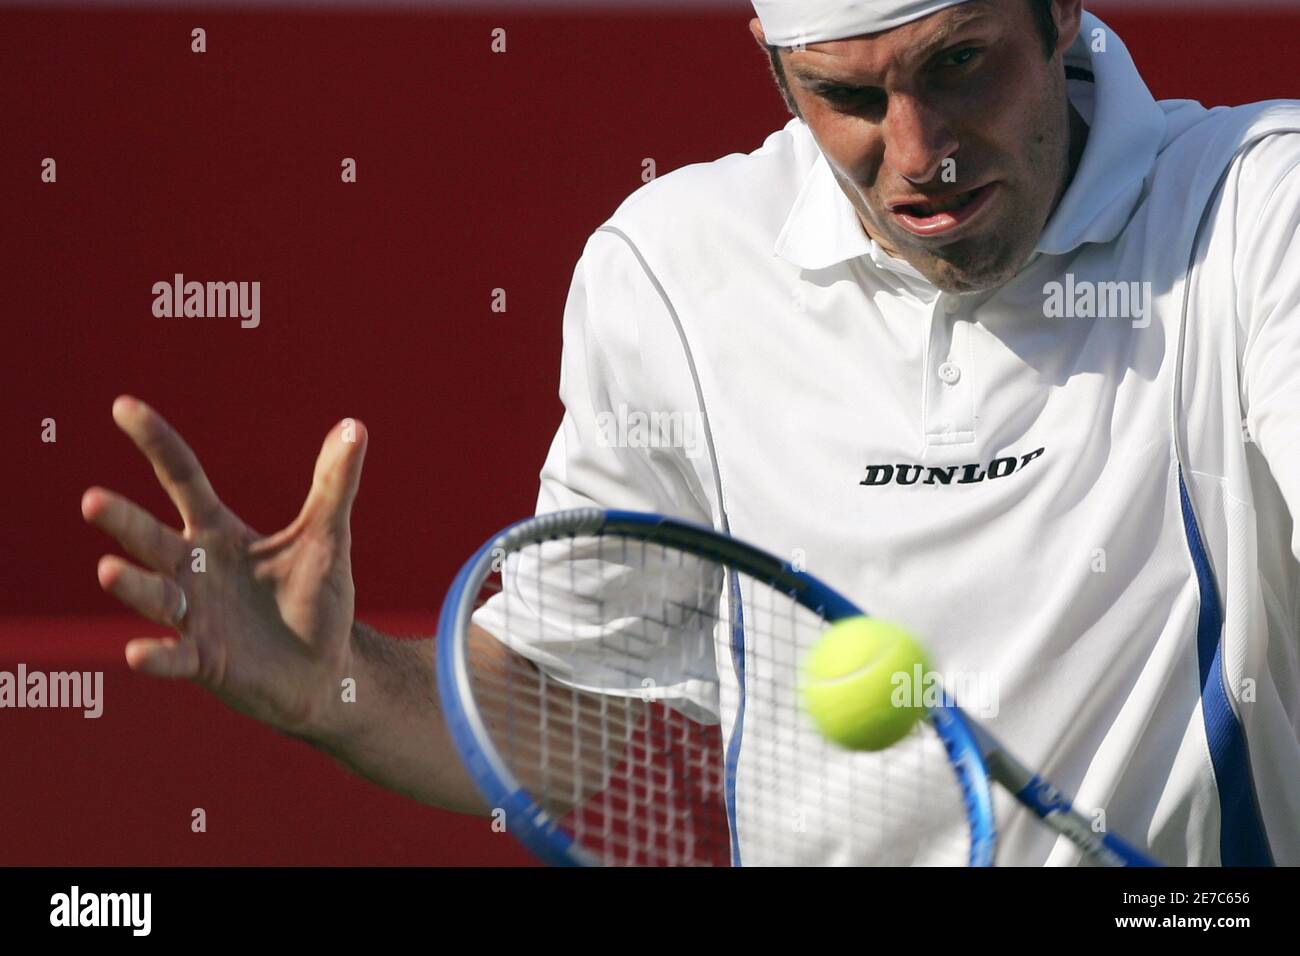 Britain's Greg Rusedski hits a return to Anthony Dupuis of France during  their match at the Stella Artois Championship tennis tournament at the  Queen's Club in London June 12, 2006. REUTERS/Luke MacGregor (